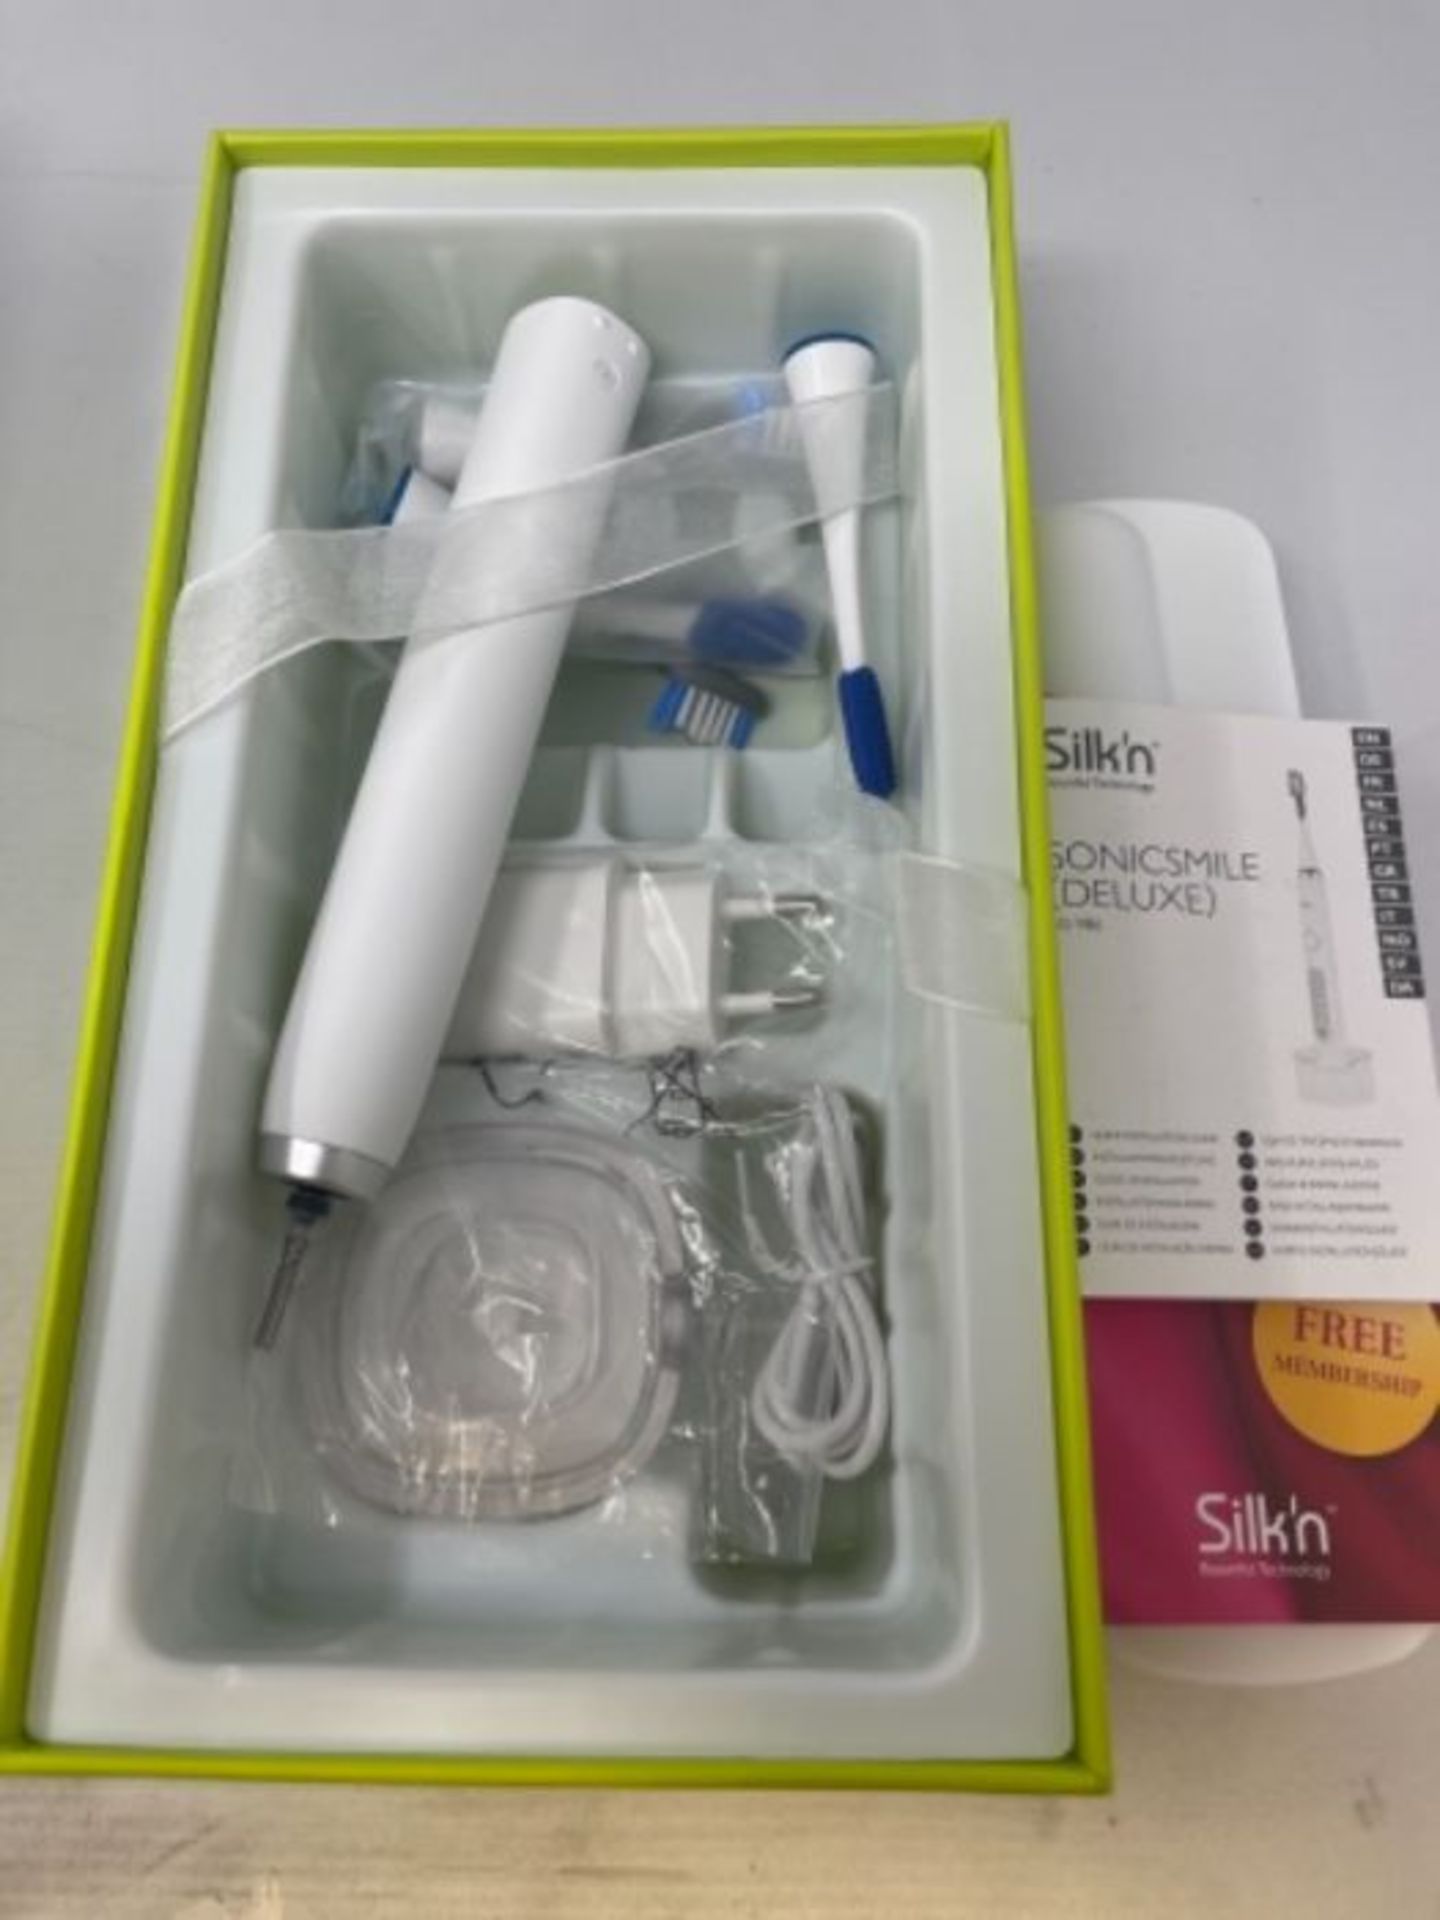 Silk'n SonicSmile Deluxe - Electric Toothbrush for Cleaner, Whiter Teeth 31.000 P.M. - - Image 2 of 3